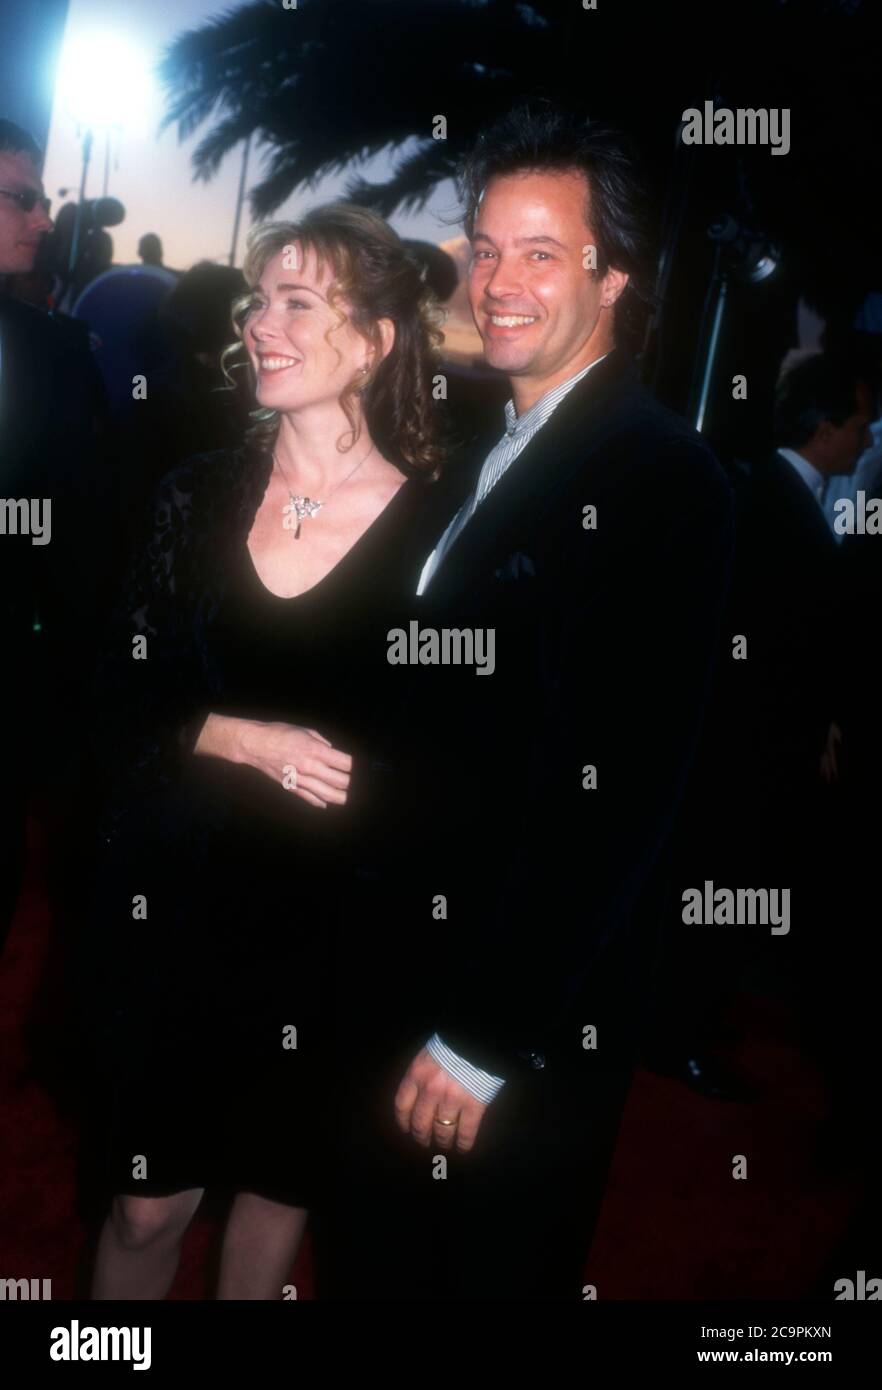 Santa Monica, California, USA 24th February 1996 Actress Roxanne Hart and actor Philip Casnoff attend the Second Annual Screen Actors Guild Awards on February 24, 1996 at Santa Monica Civic Auditorium in Santa Monica, California, USA. Photo by Barry King/Alamy Stock Photo Stock Photo